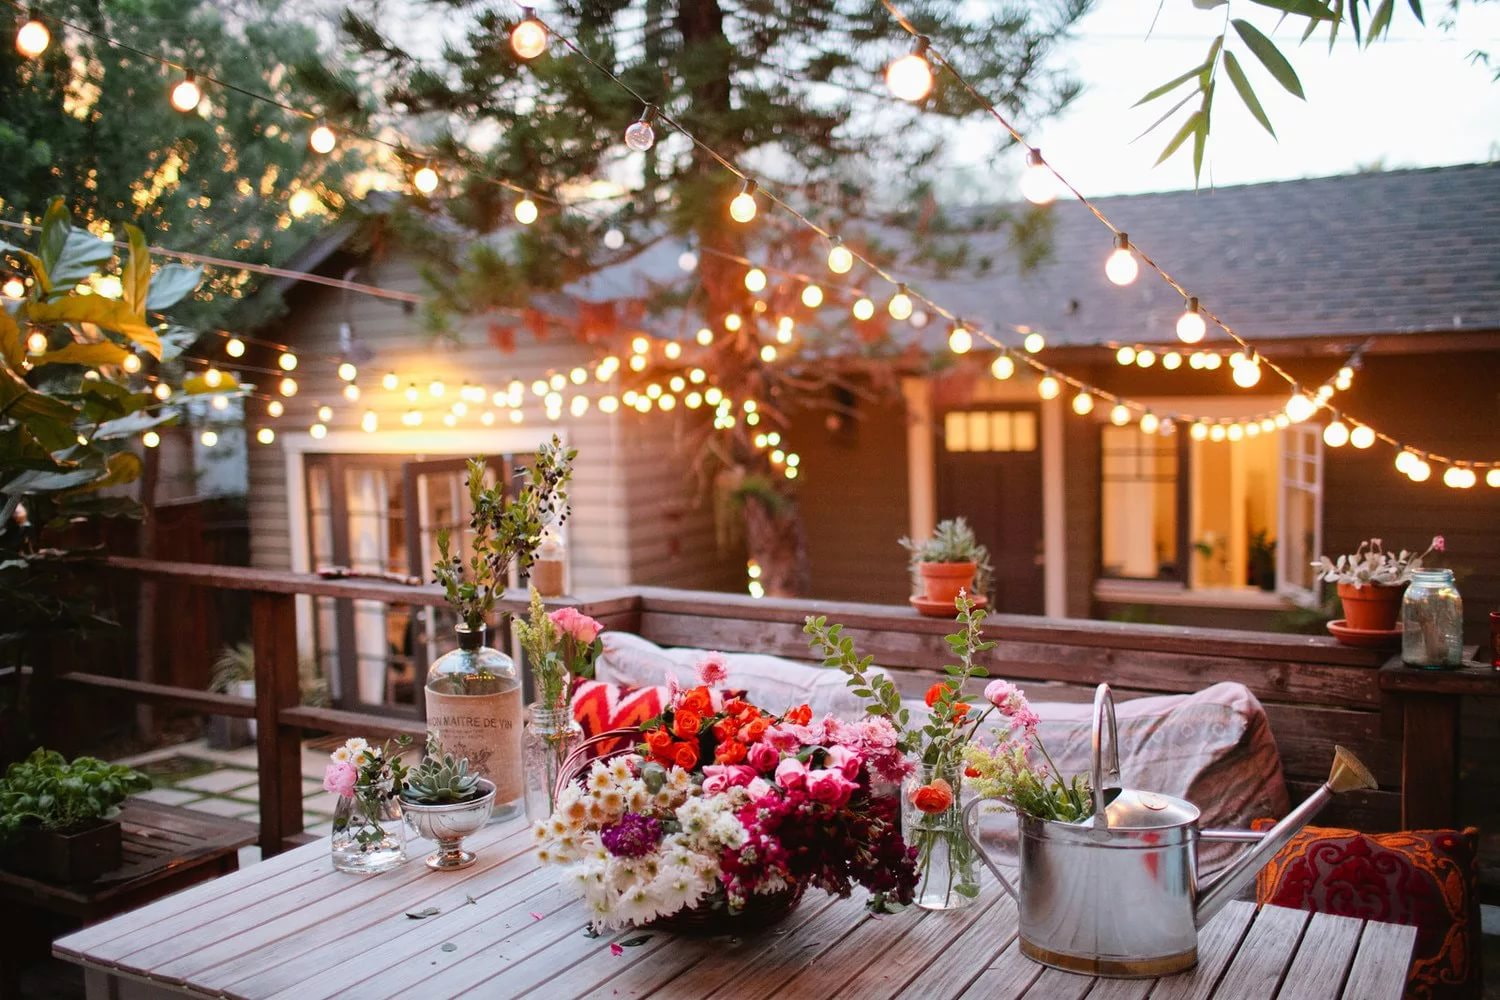 15 simple ideas for creating coziness in the country